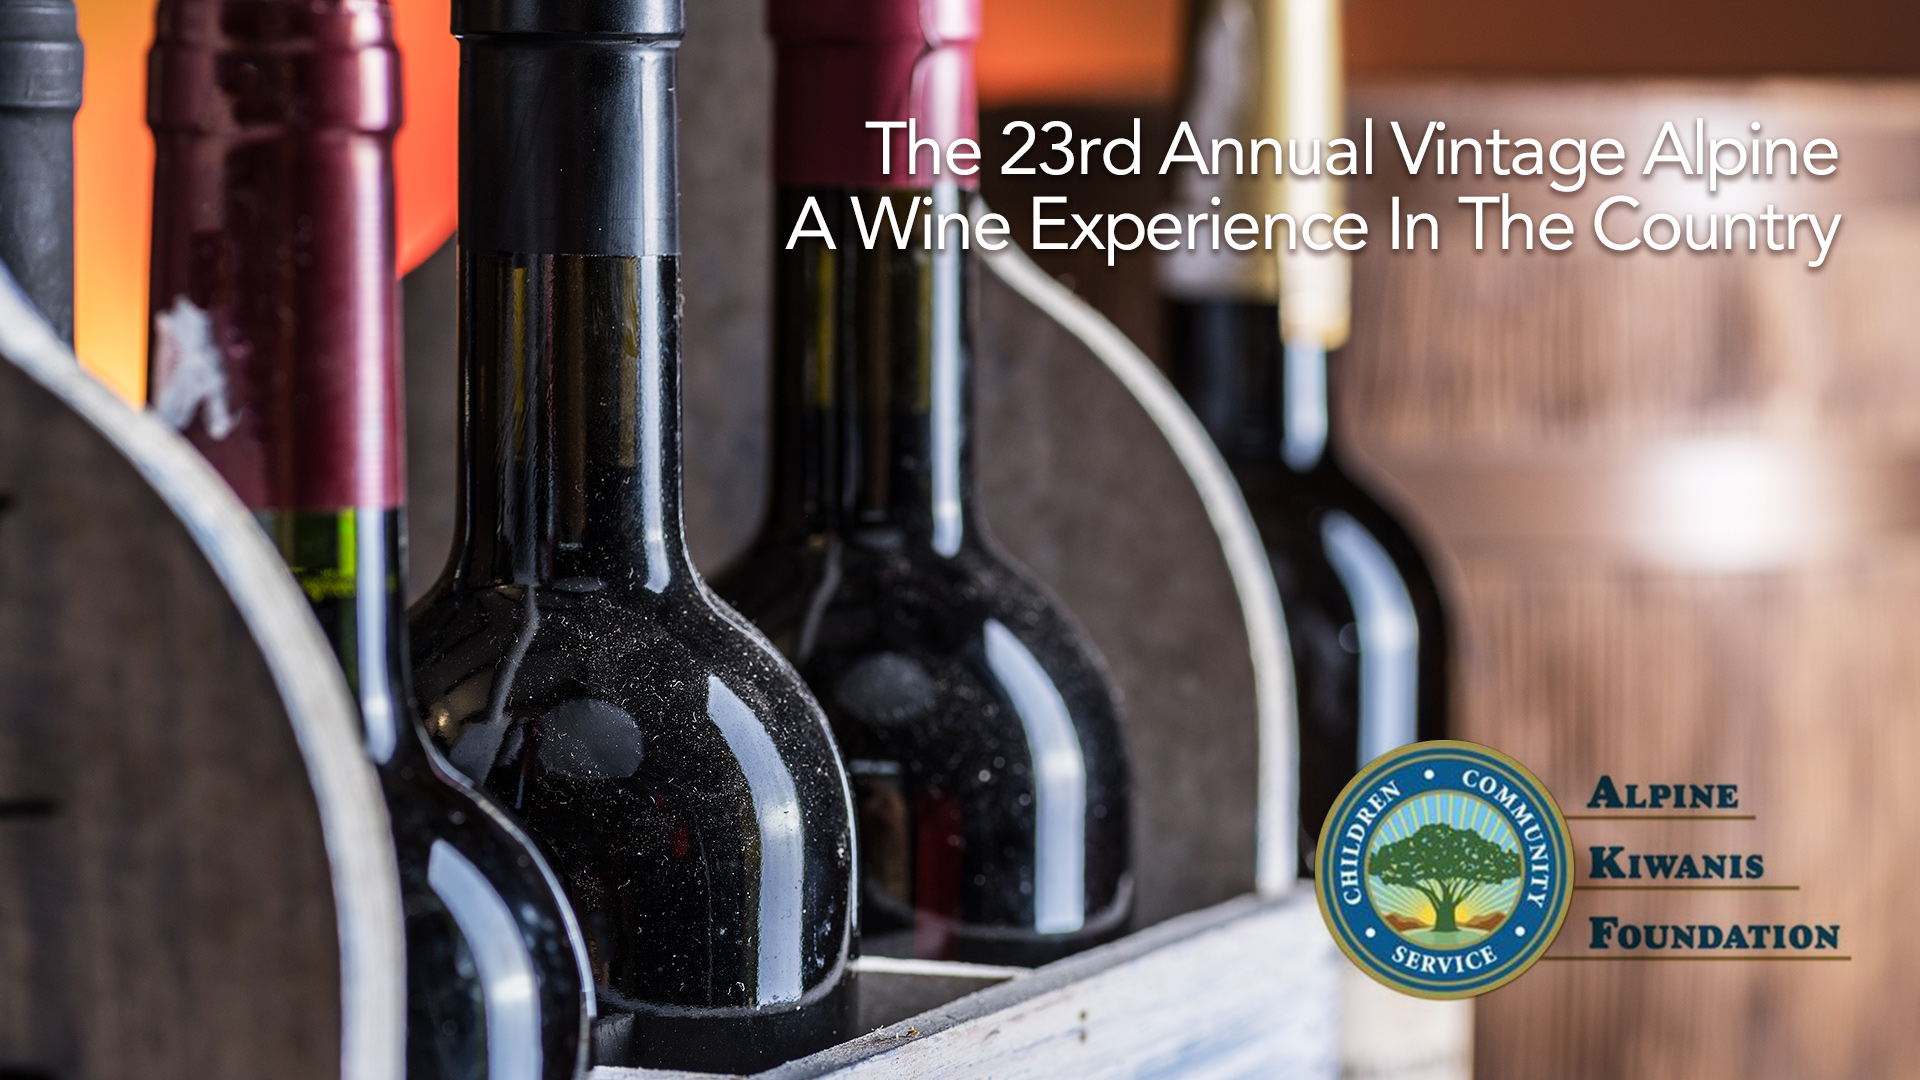 The 23rd Annual Vintage Alpine – A Wine Experience In The Country